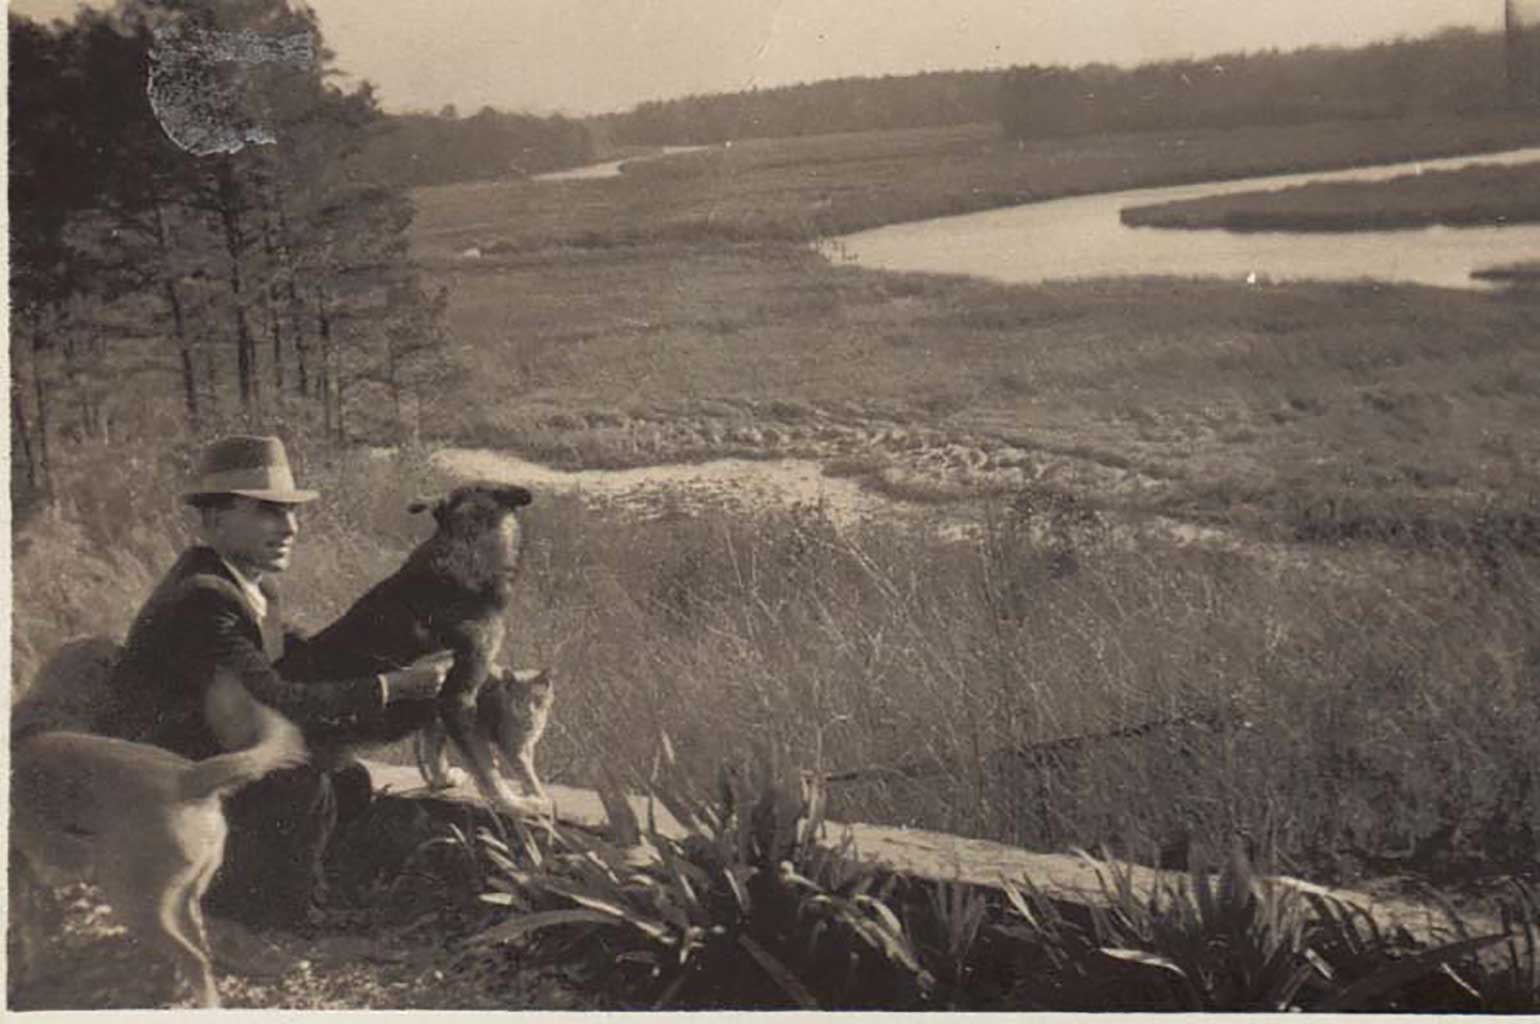 atlee-martin-overlooking-western-branch-of-nans-river-c1940-earl-martin-photo